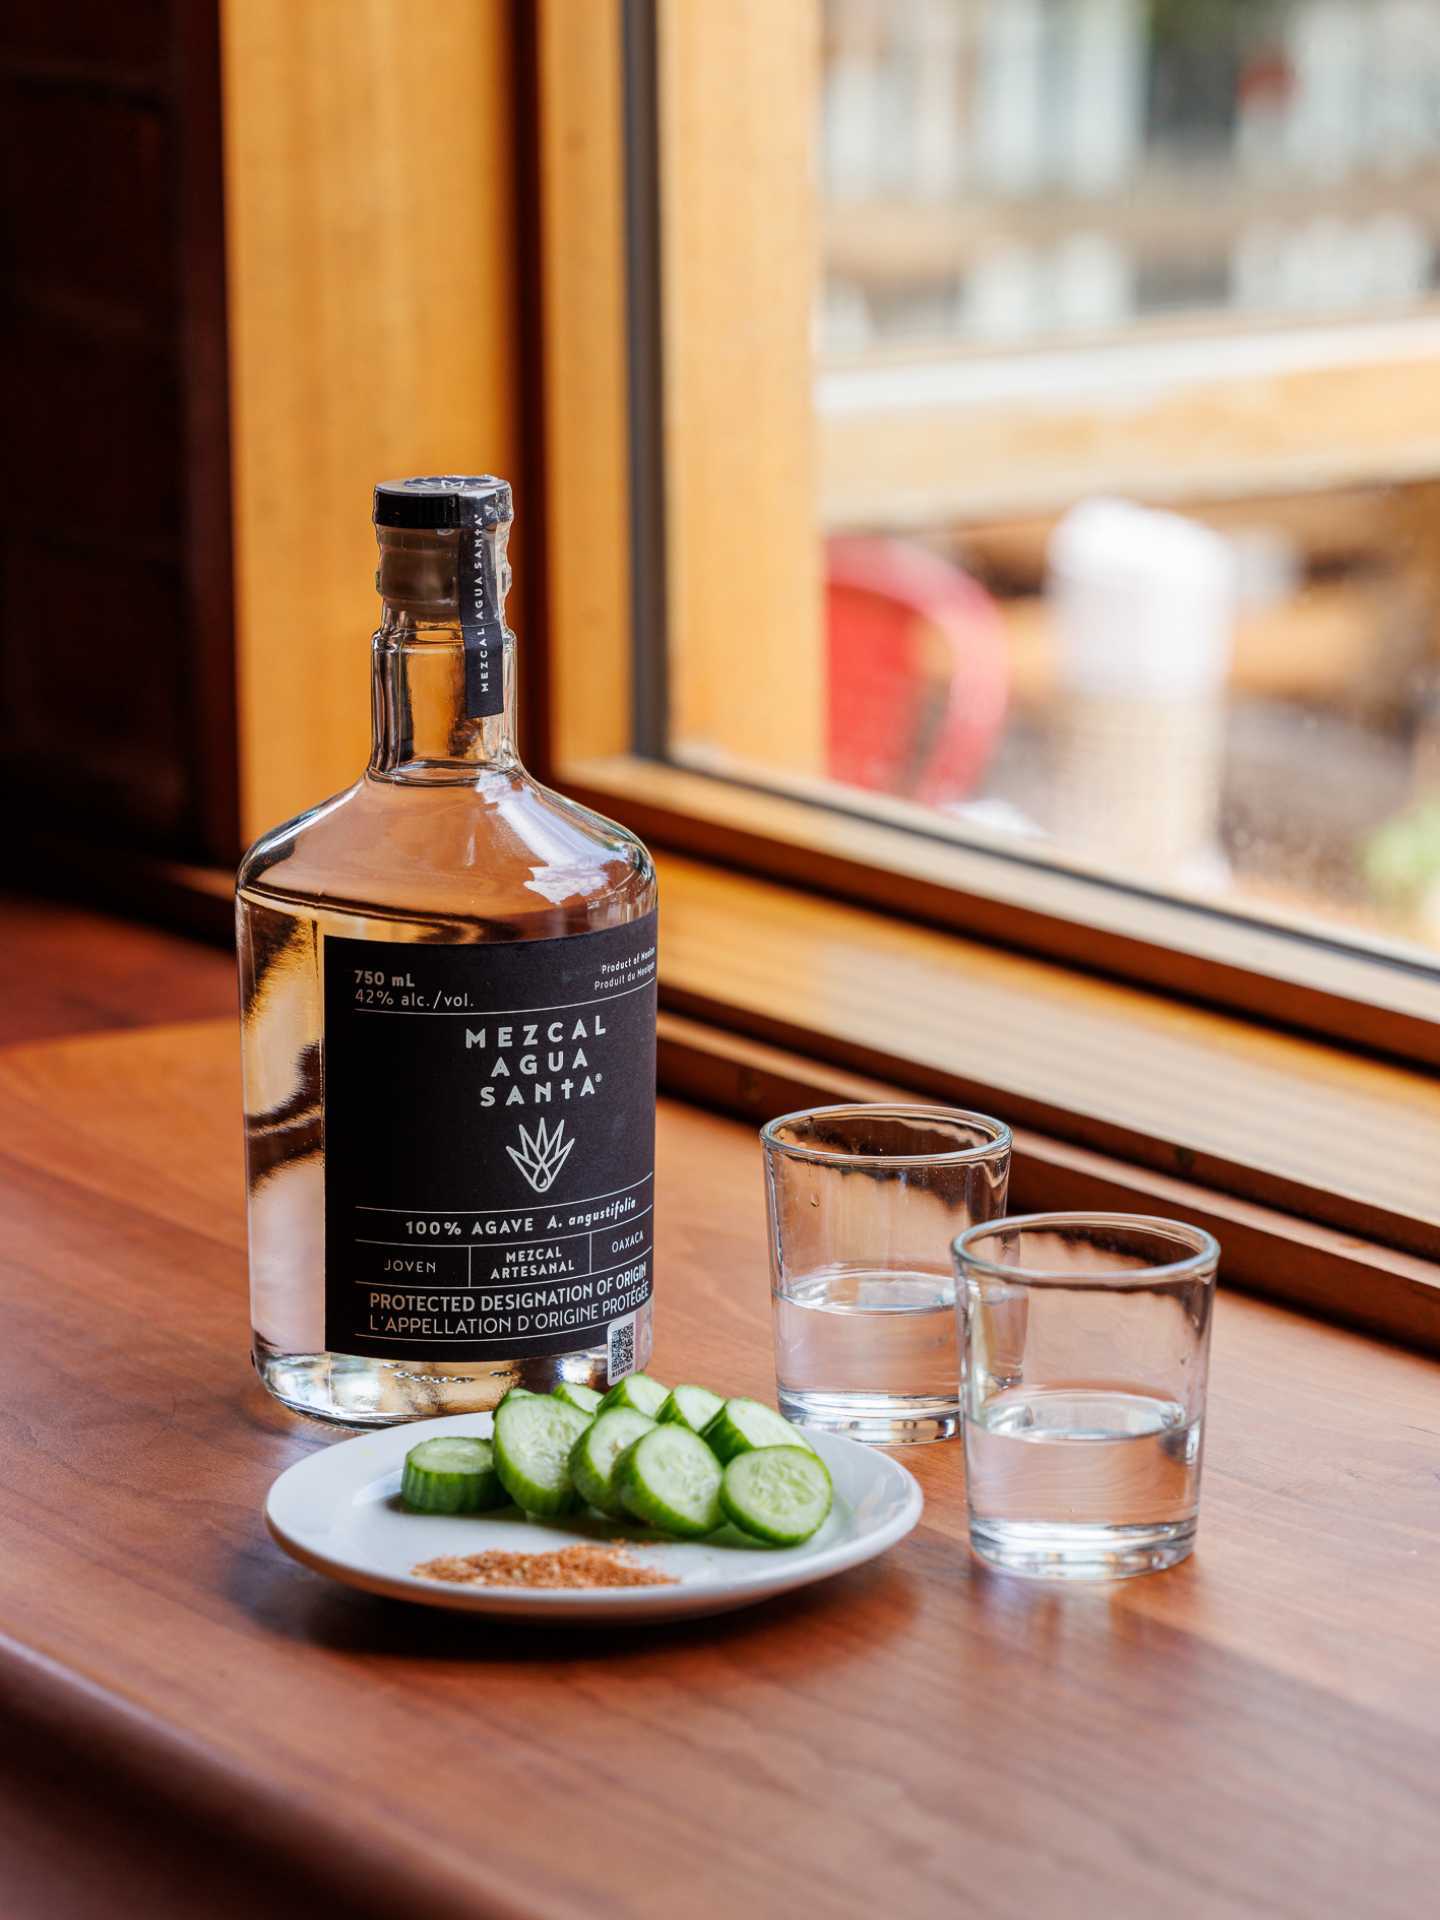 Tequila and mezcal | A bottle of mezcal on a table with cucumbers and rimming salt